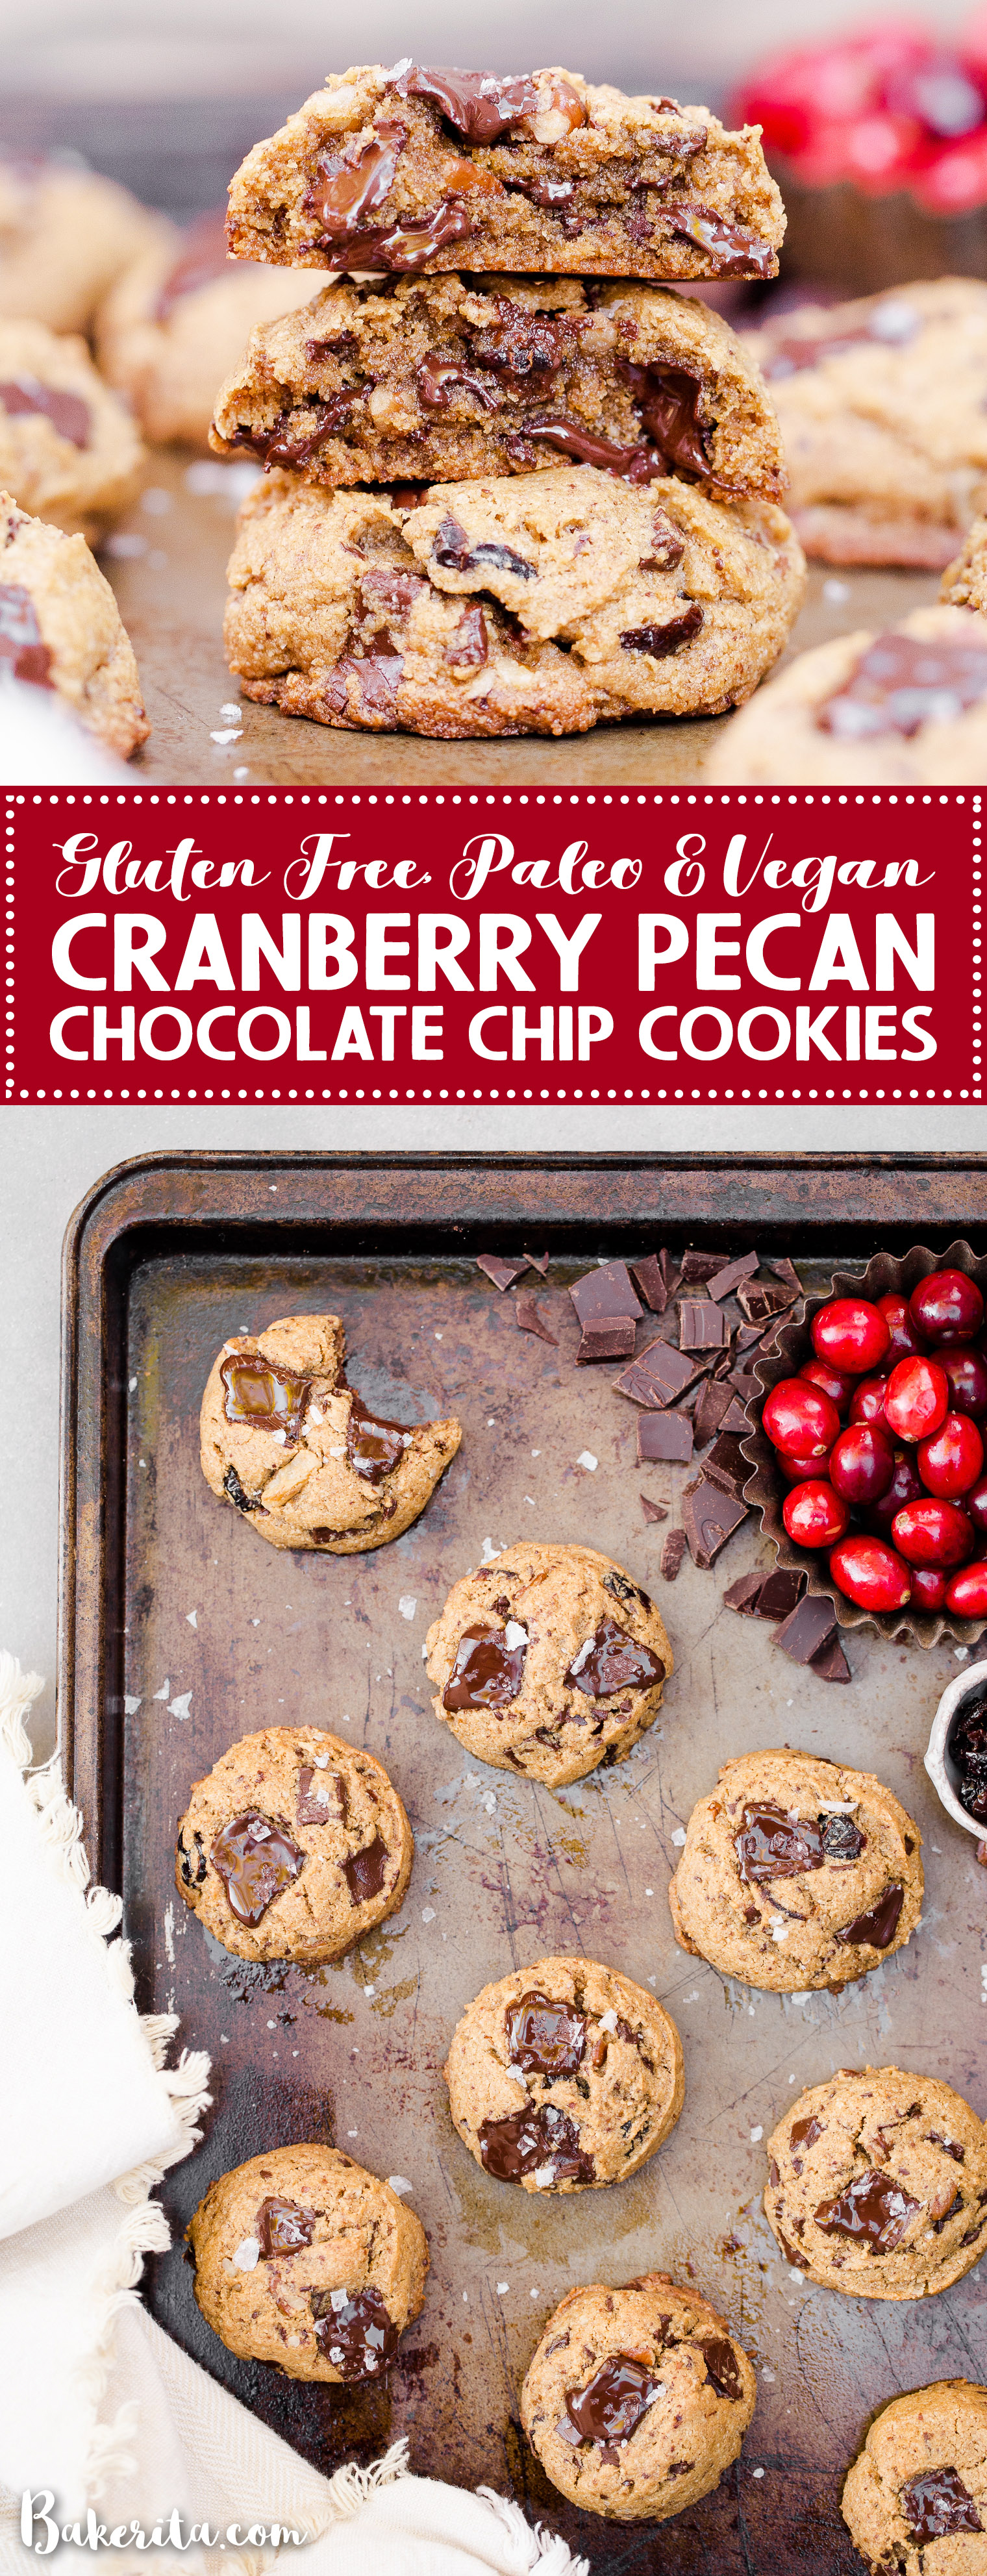 These Cranberry Pecan Chocolate Chip Cookies are gooey in the middle with perfectly crispy edges. Think: your favorite chocolate chip cookie, dressed up with dried cranberries and toasty pecans. I recommend devouring one of these gluten-free, paleo, and vegan cookies warm from the oven.